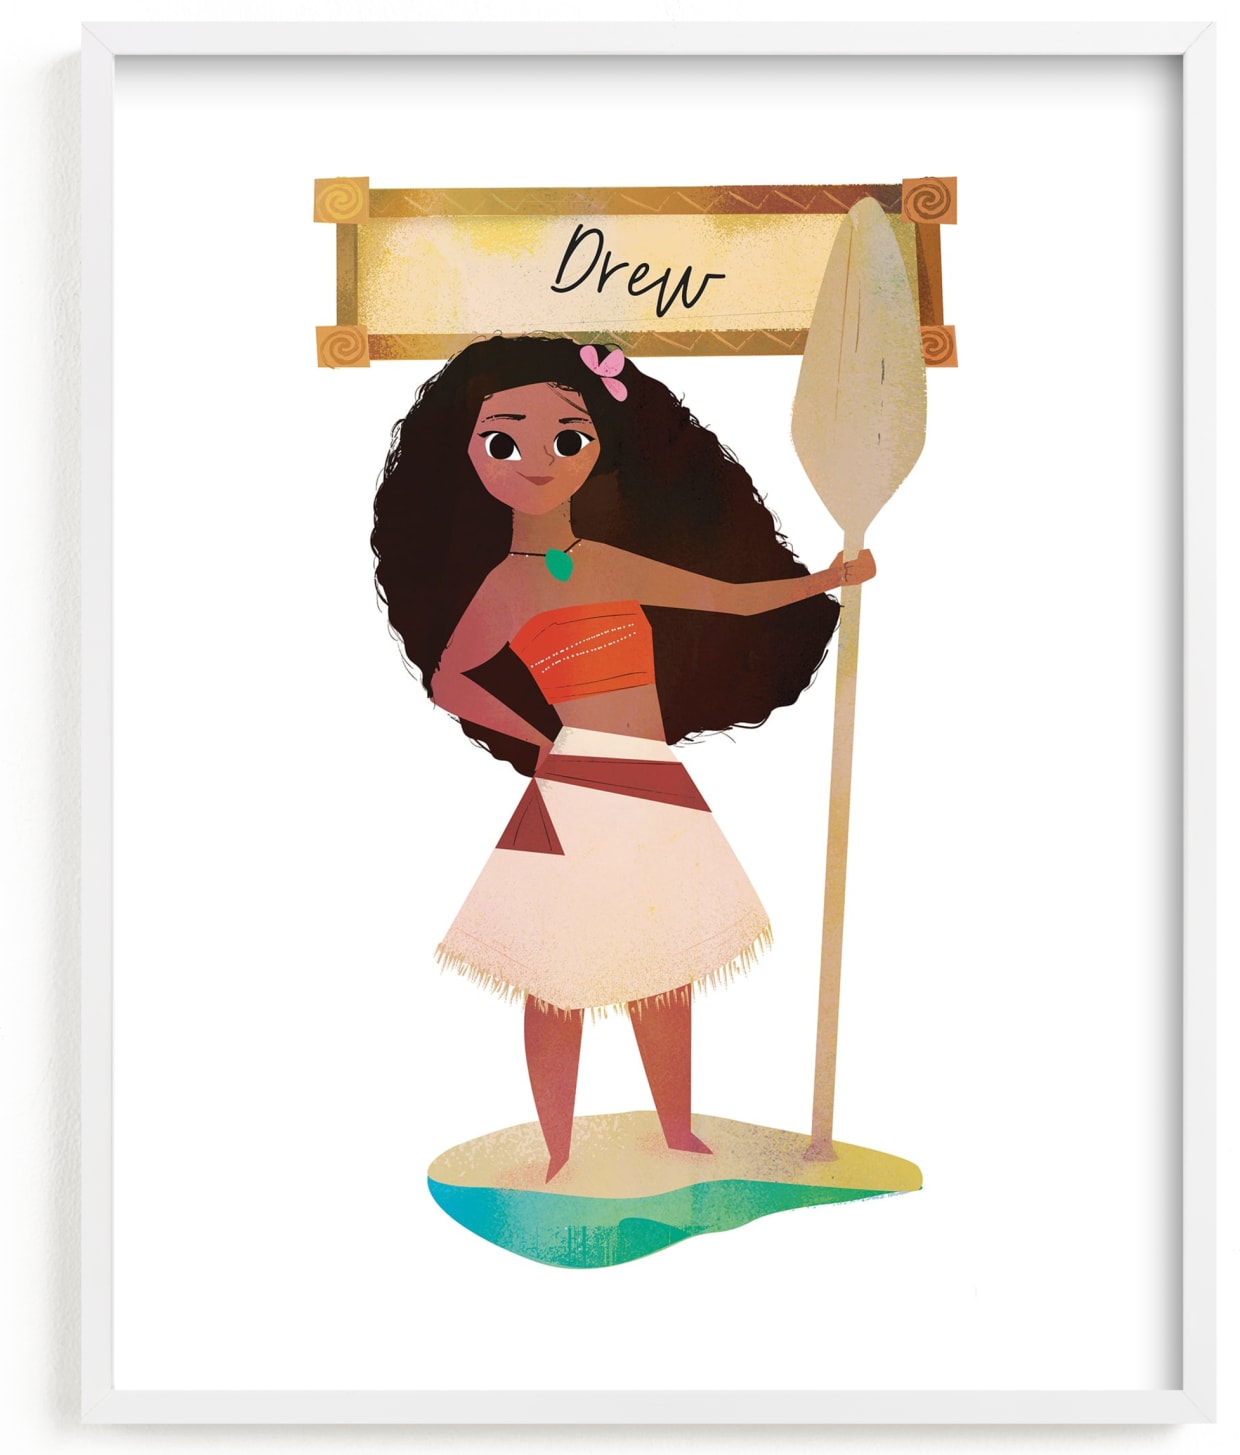 This is a colorful disney art by Lori Wemple called Disney's Moana the Voyager.